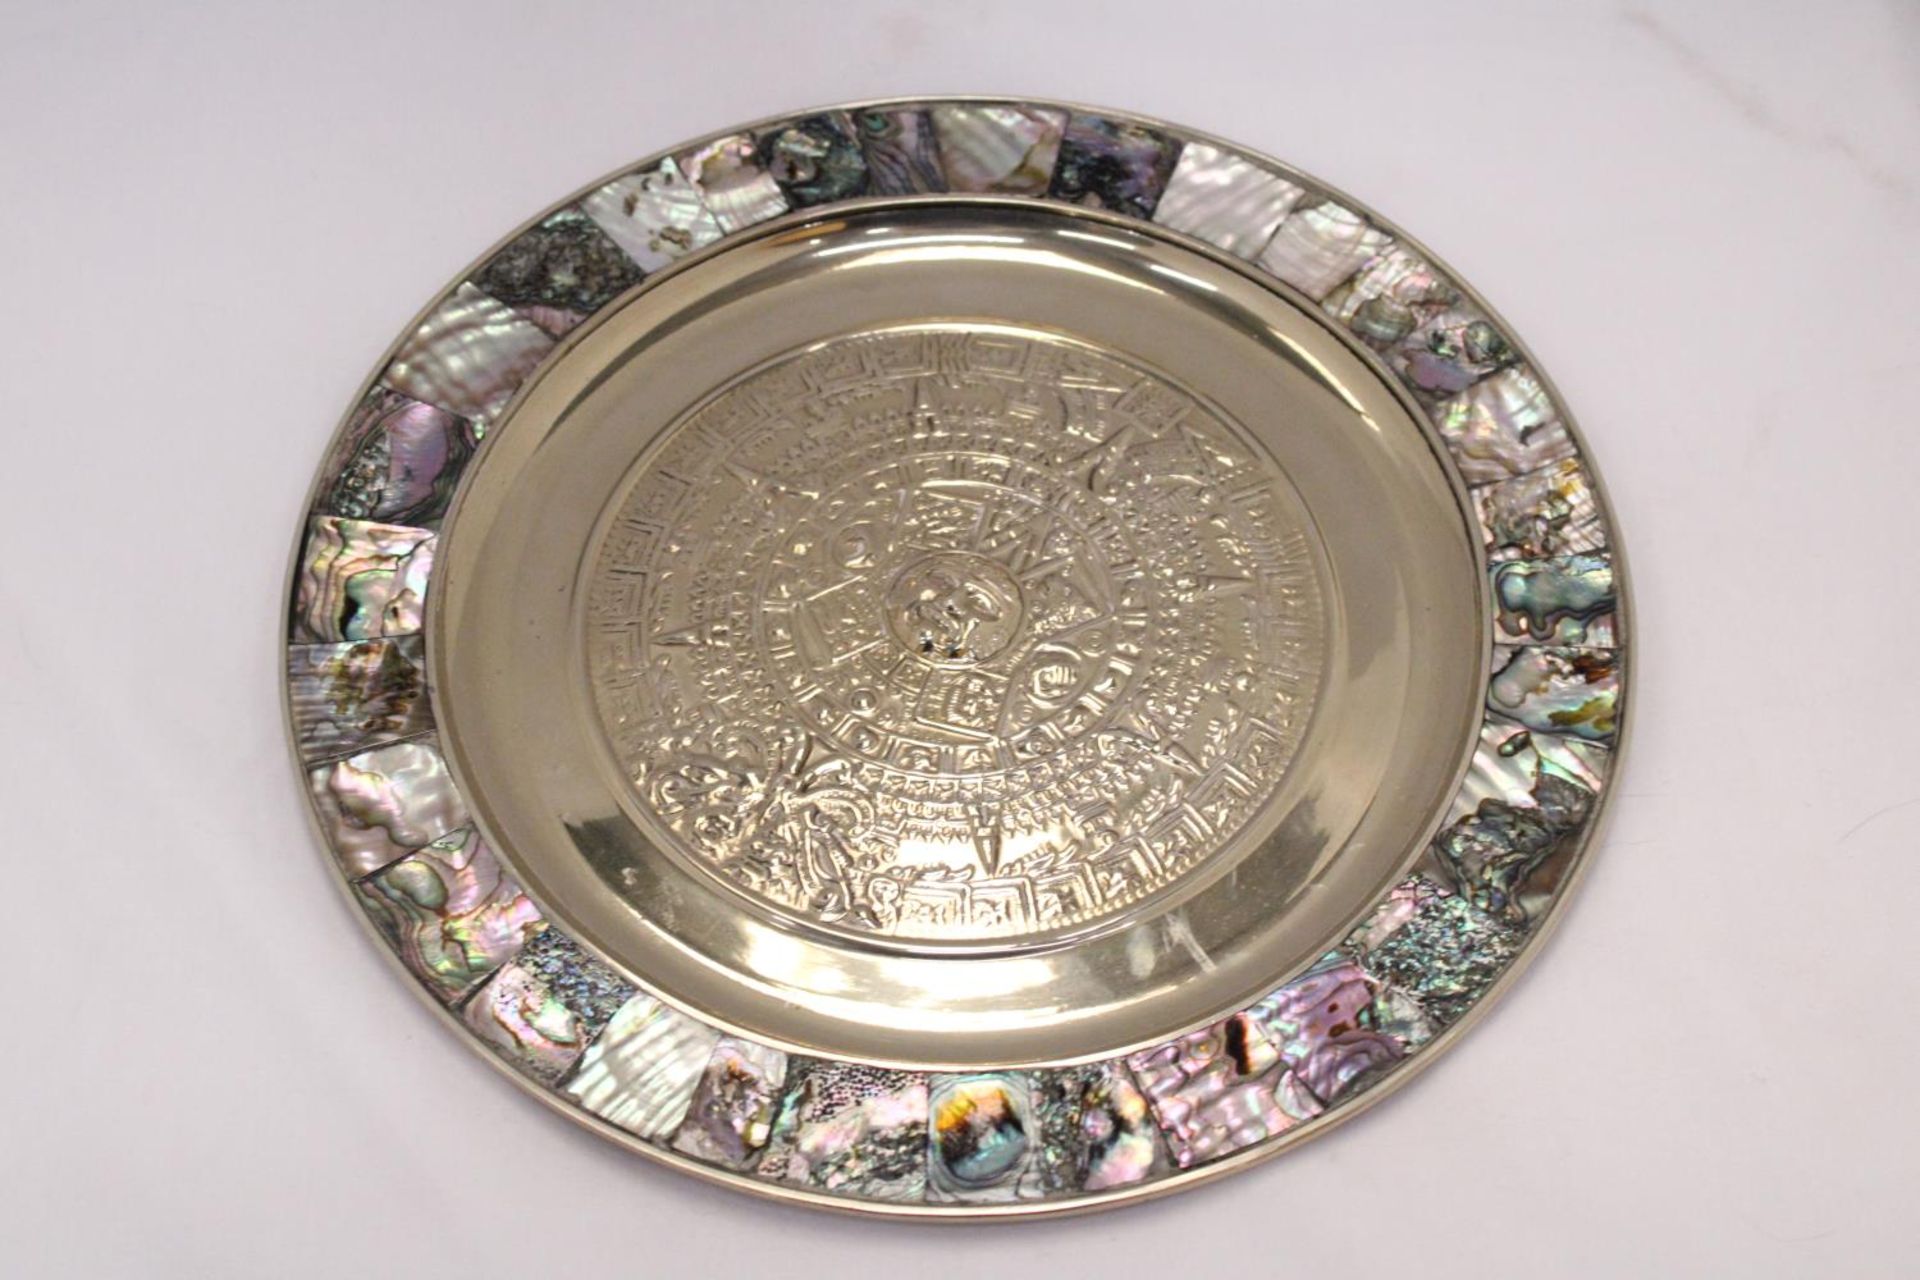 A MIXED LOT OF METALWARE TO INCLUDE A VINTAGE ABALONE MOTHER OF PEARL PLATE, A CANDLE STICK, A